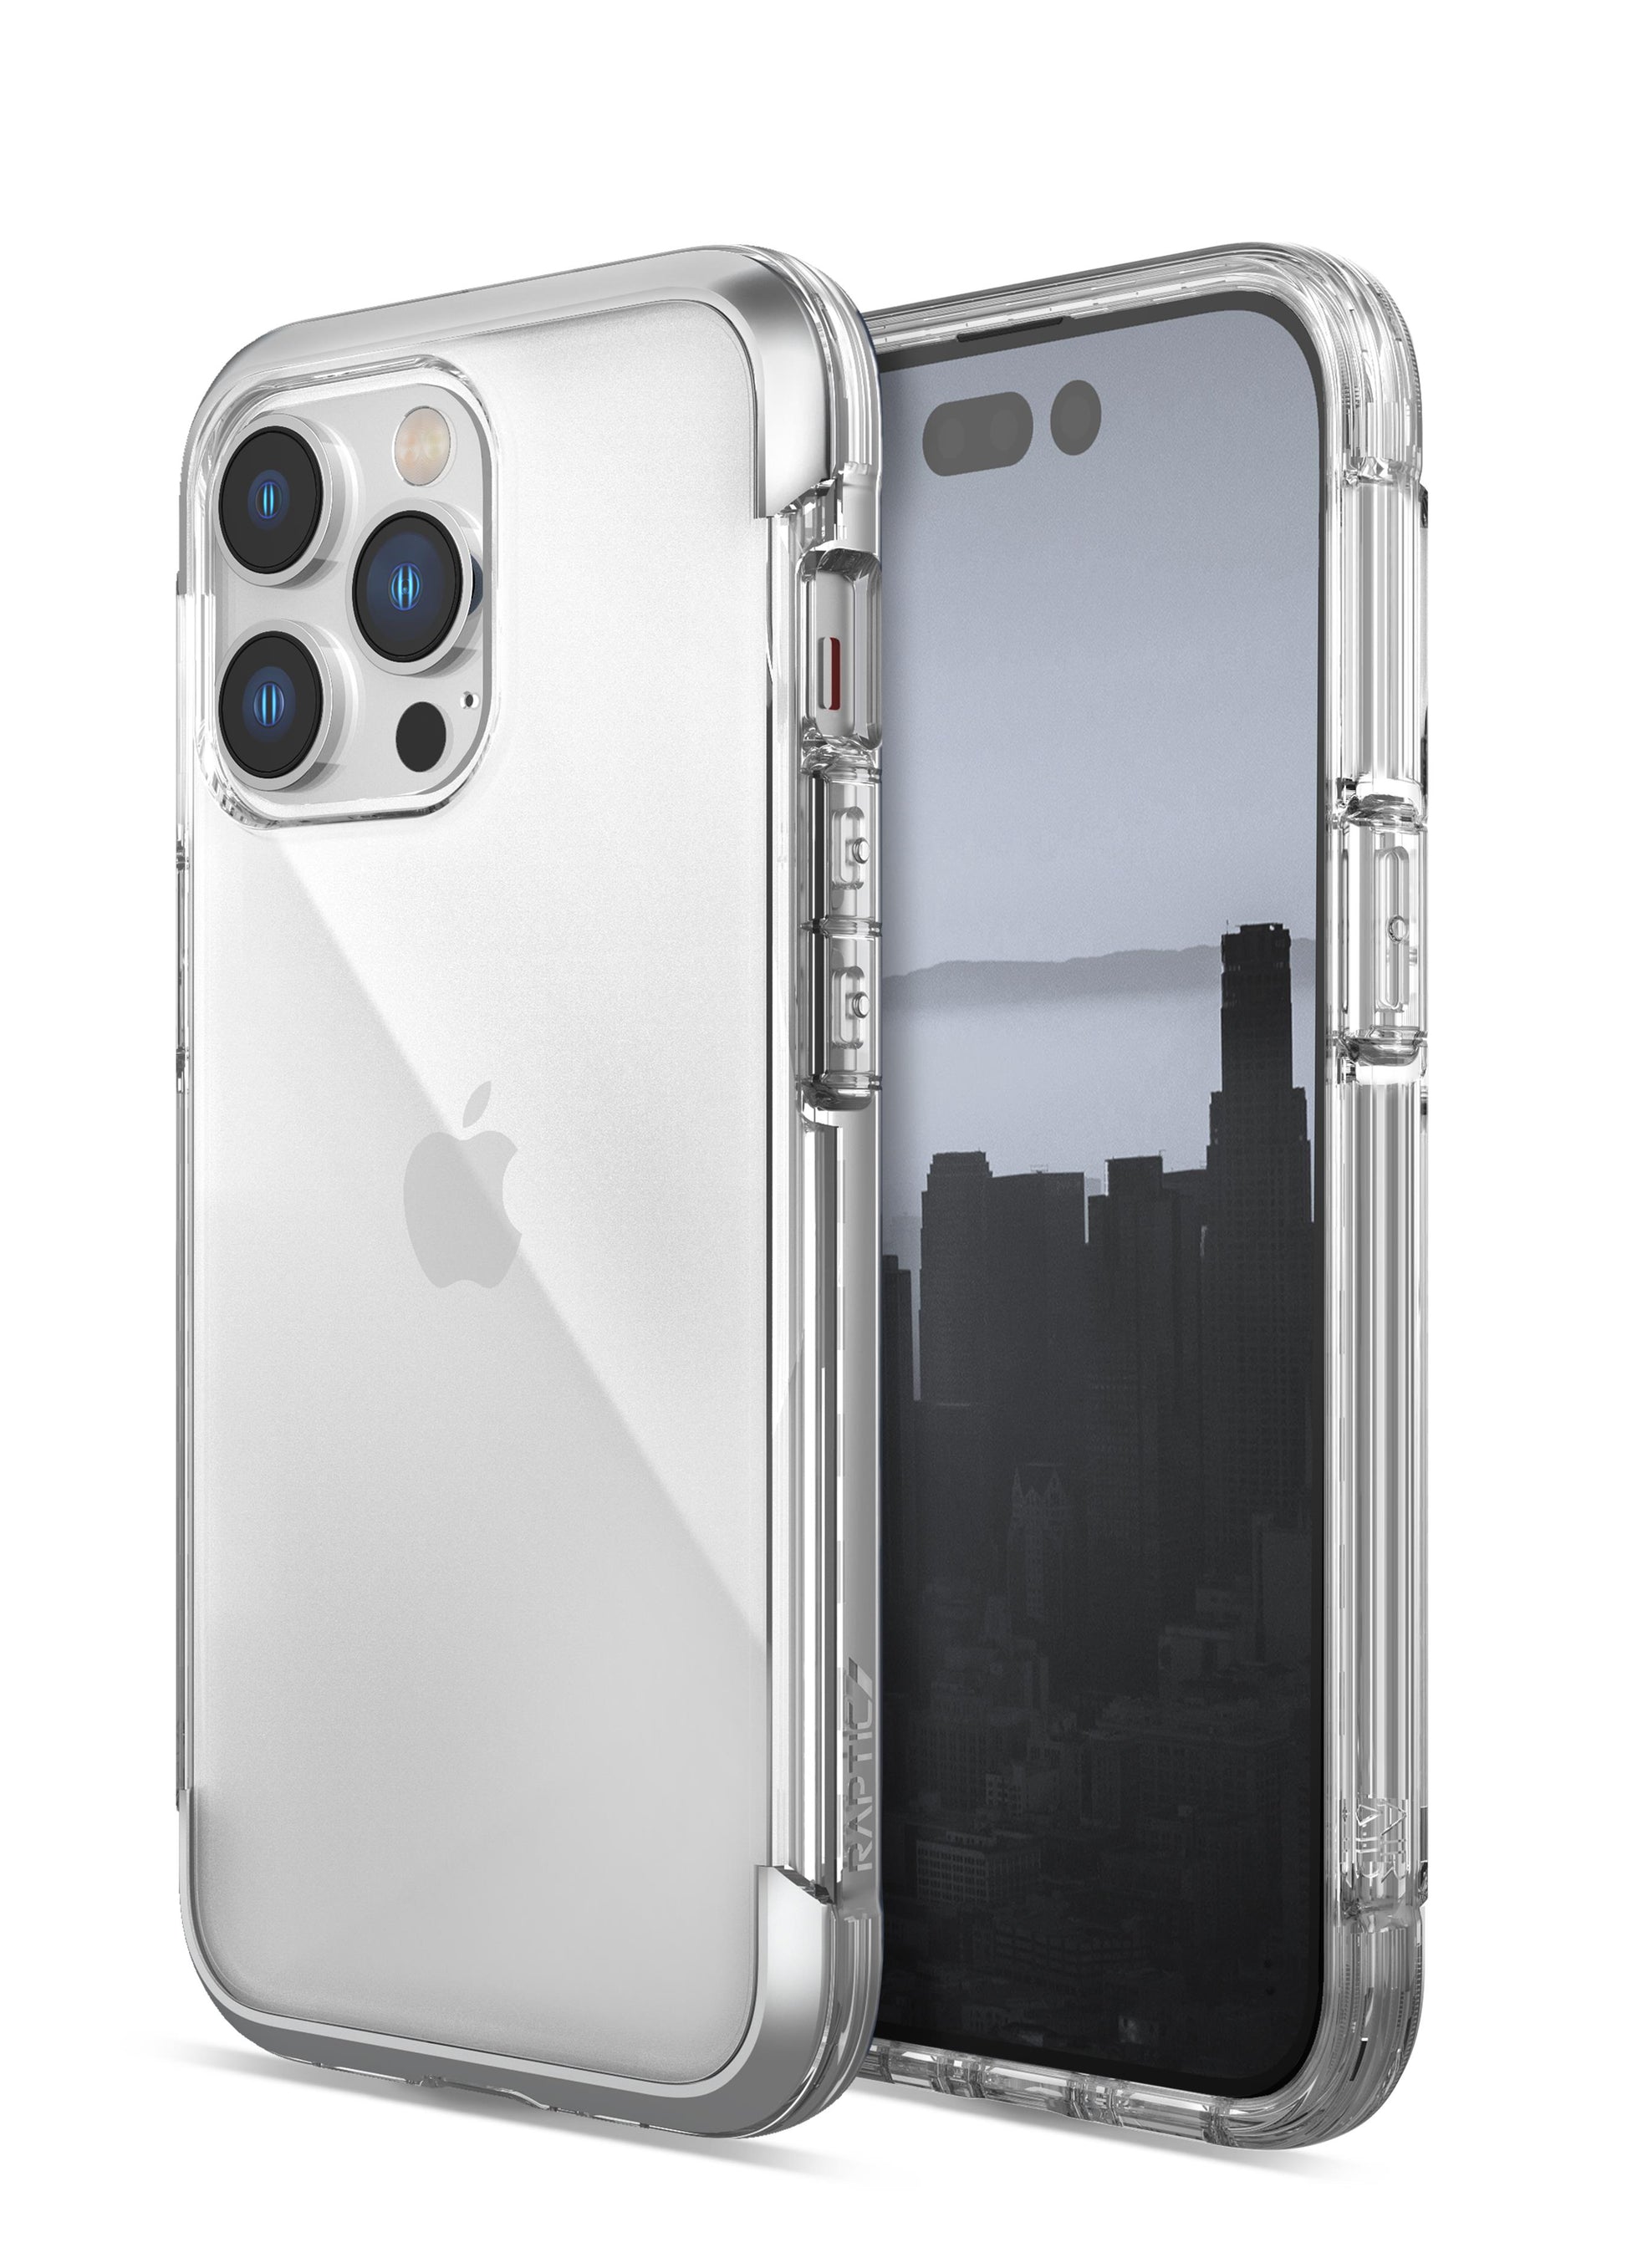 A strong Raptic Air metal case for the iPhone 11 pro that provides good protection.